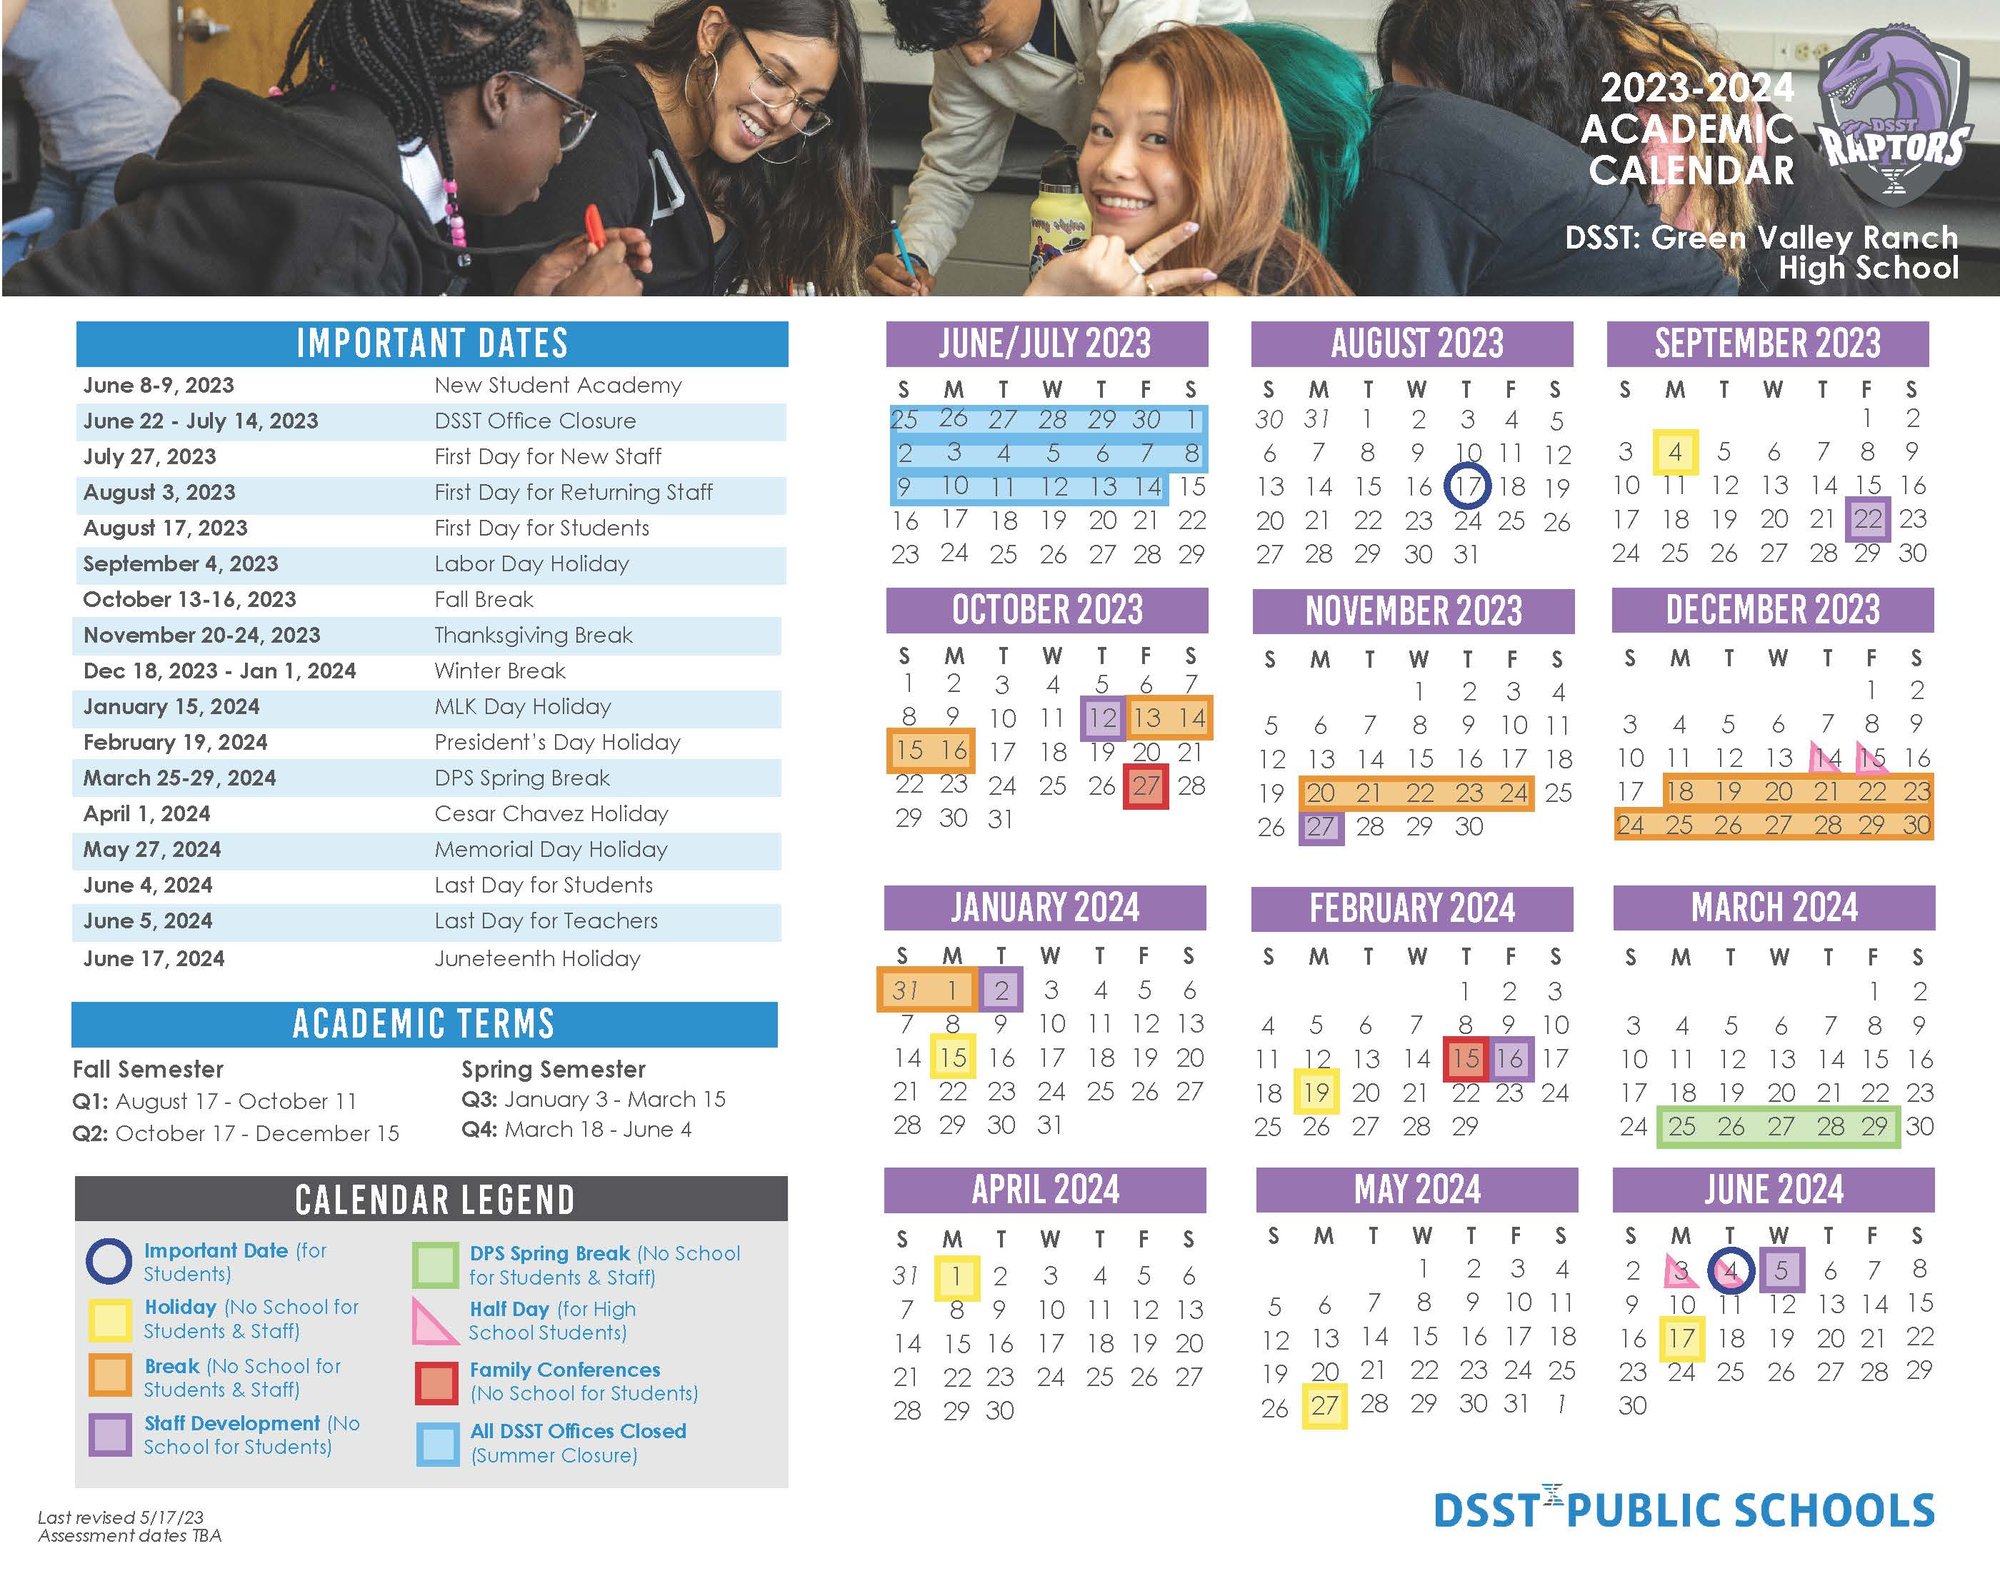 GVR HS Calendar 23-24 English and Spanish Updated 5.17.23_Page_1